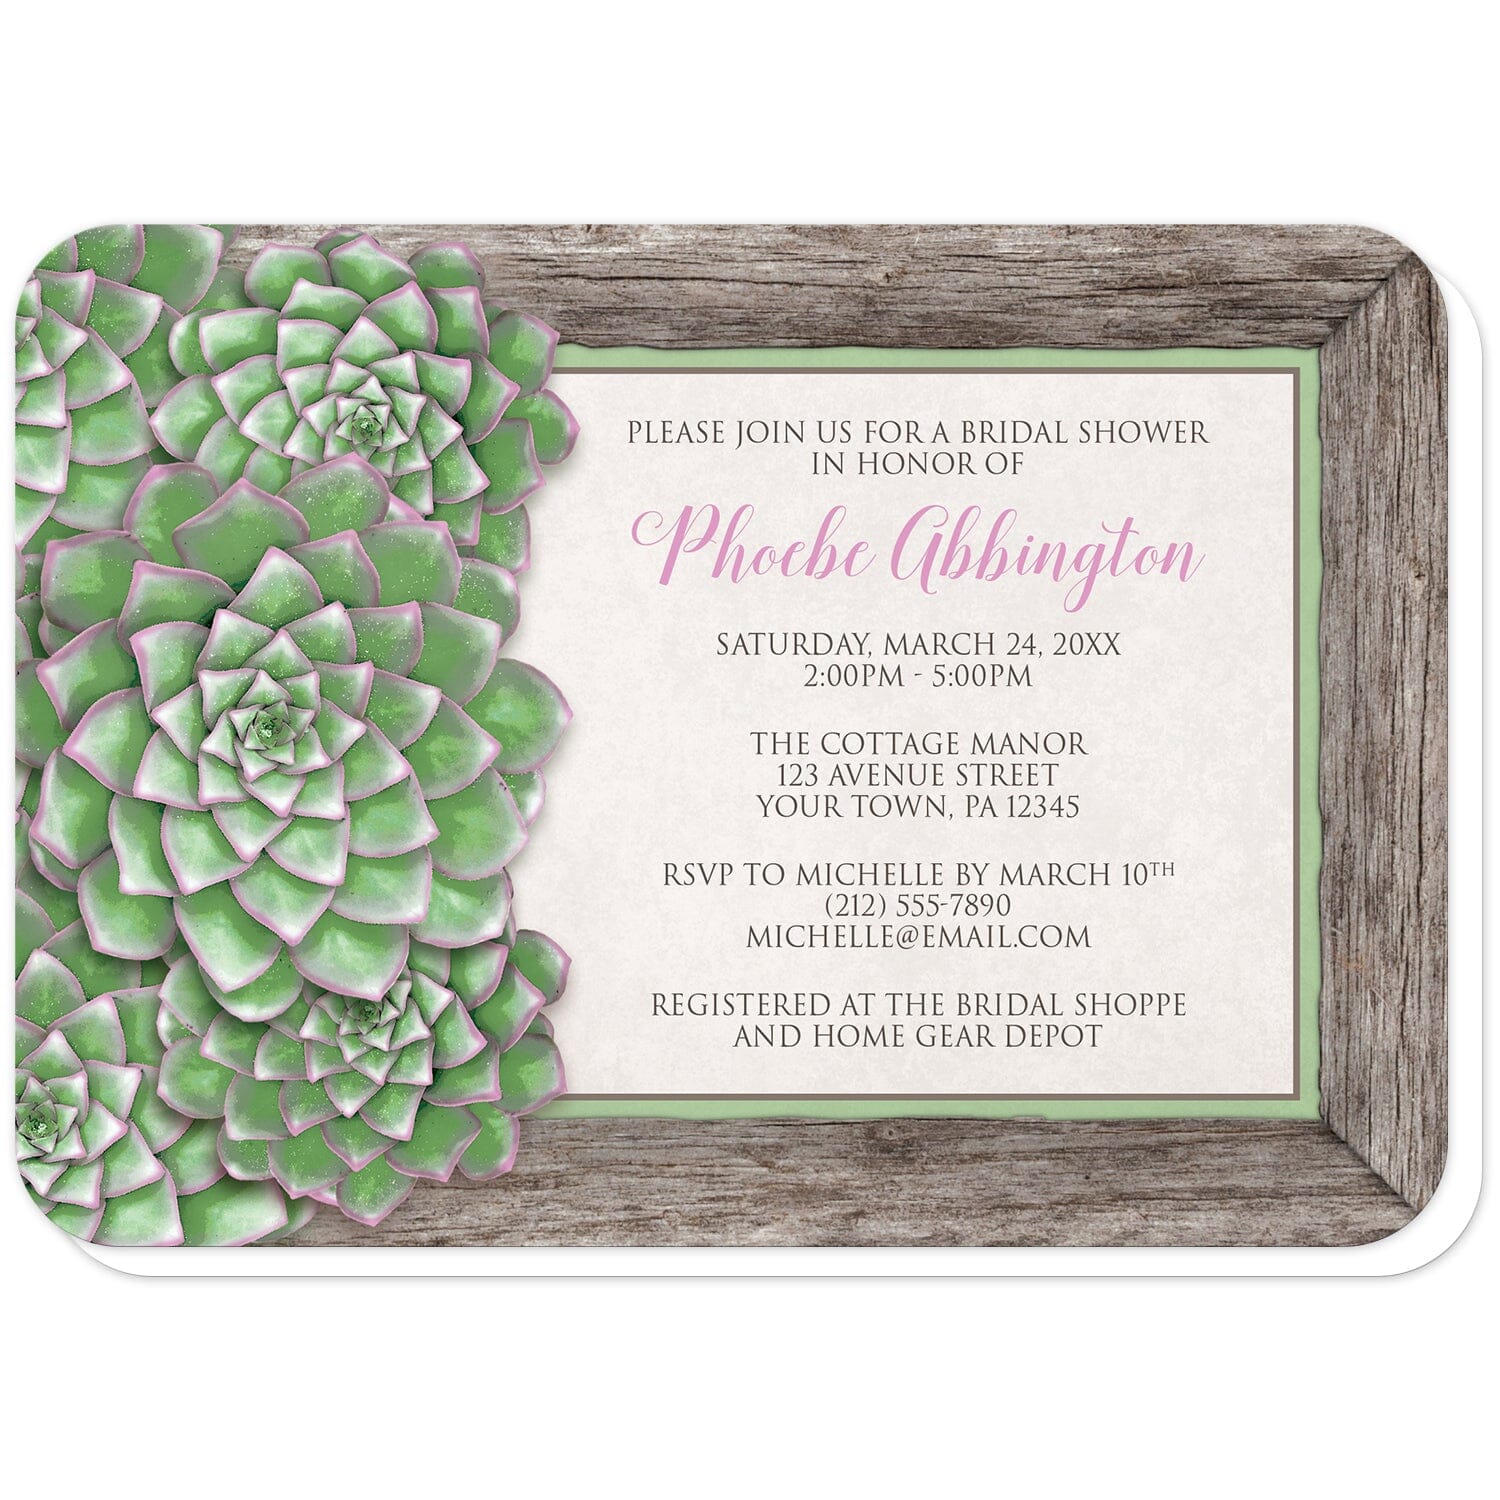 Green and Pink Succulent Wood Bridal Shower Invitations (with rounded corners) at Artistically Invited. Beautiful green and pink succulent wood bridal shower invitations with an arrangement of green succulents with pink tips along the left side of the invitations over a wooden frame border illustration. Your personalized bridal shower celebration details are custom printed in pink and brown over beige to the right of the succulents.